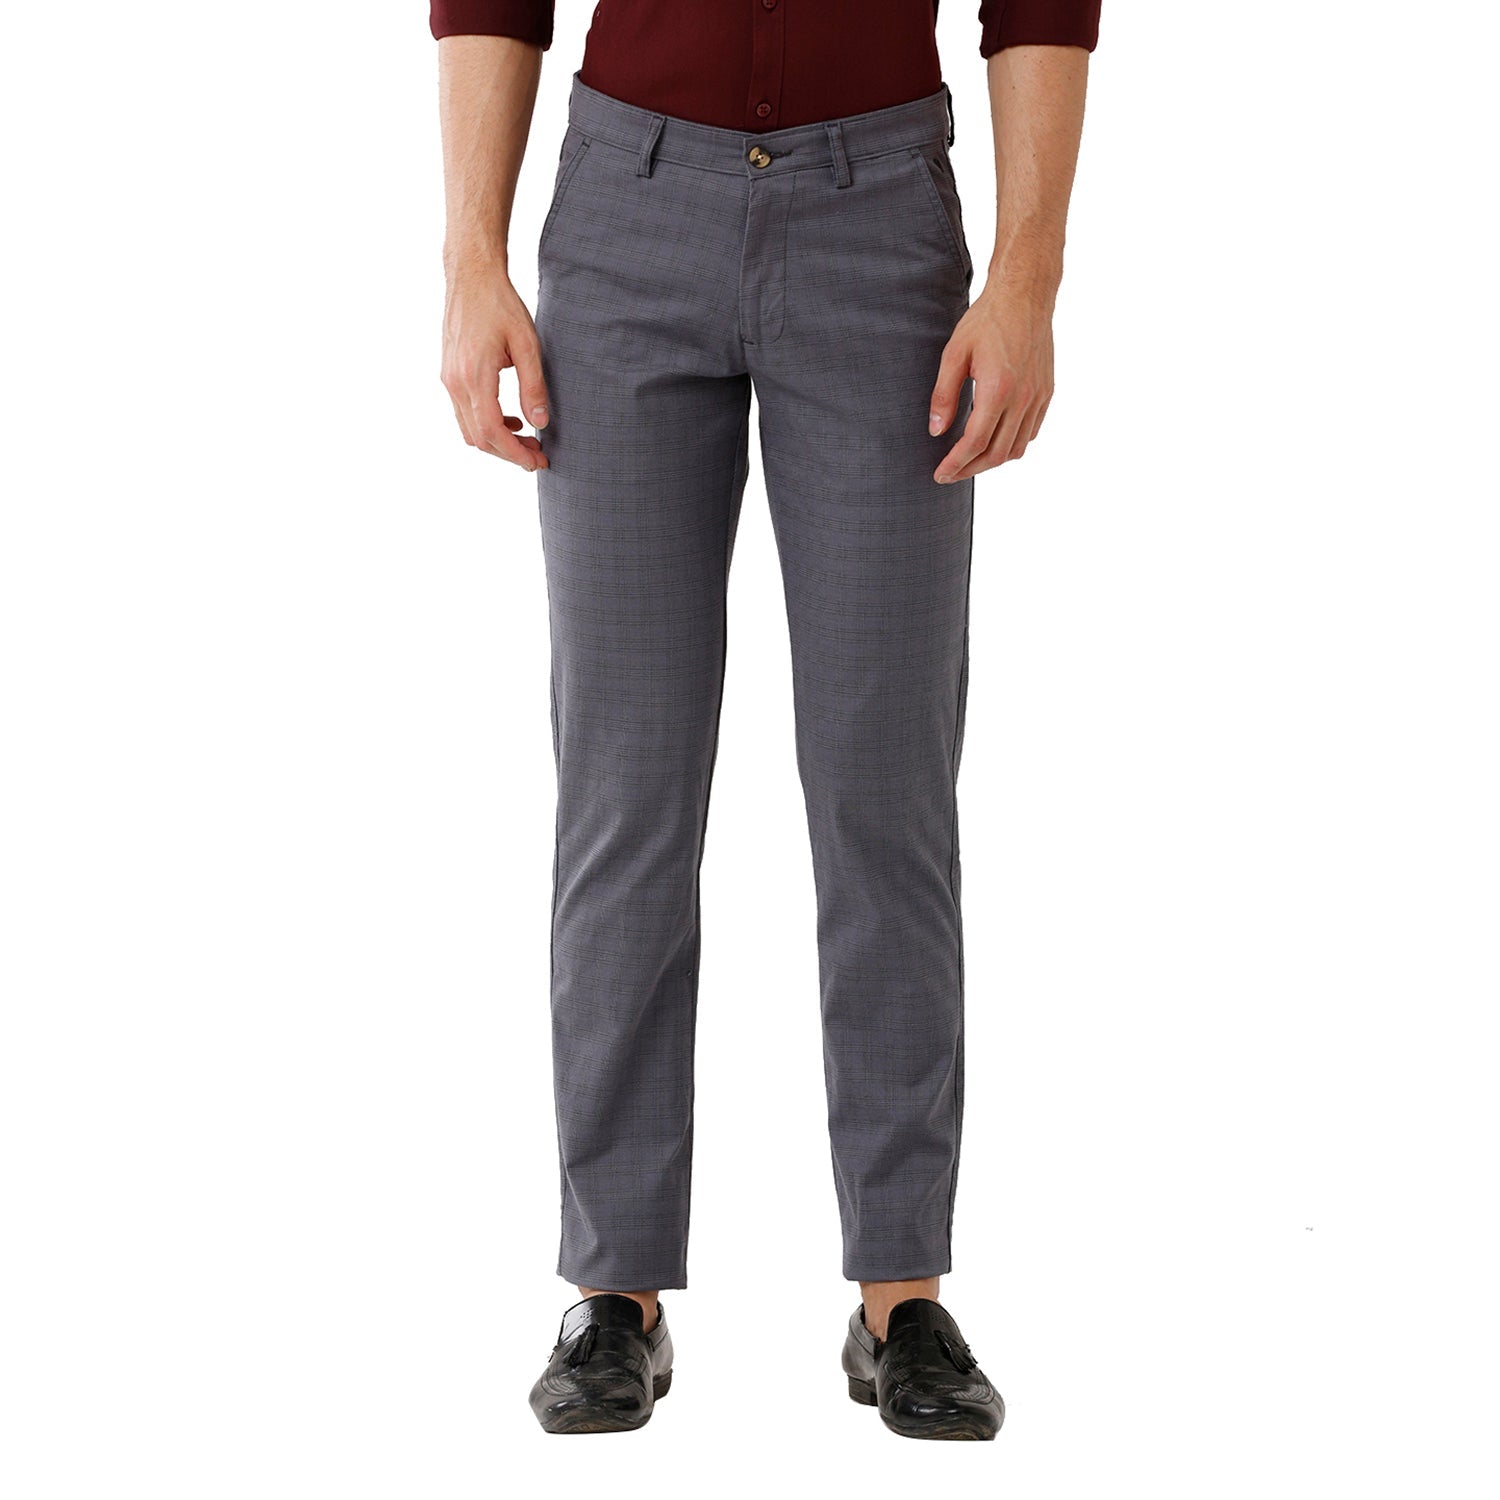 Swiss Club Mens Checked Slim Fit Grey Color Trousers -SC-34 C-GRY Pants Swiss Club 